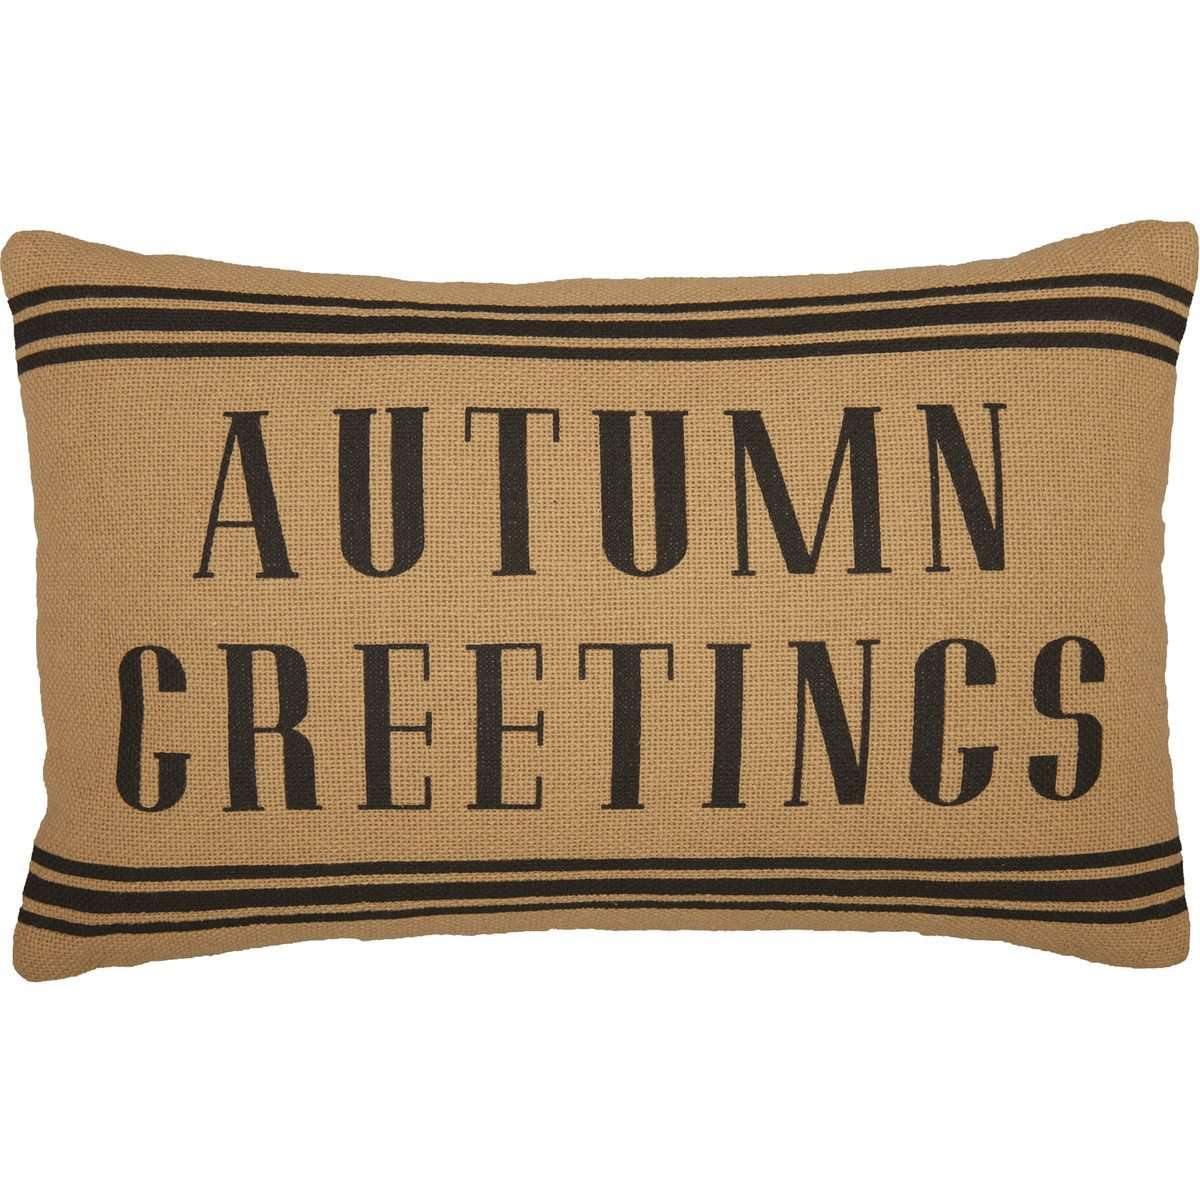 Heritage Farms Autumn Greetings Pillow 14x22 VHC Brands